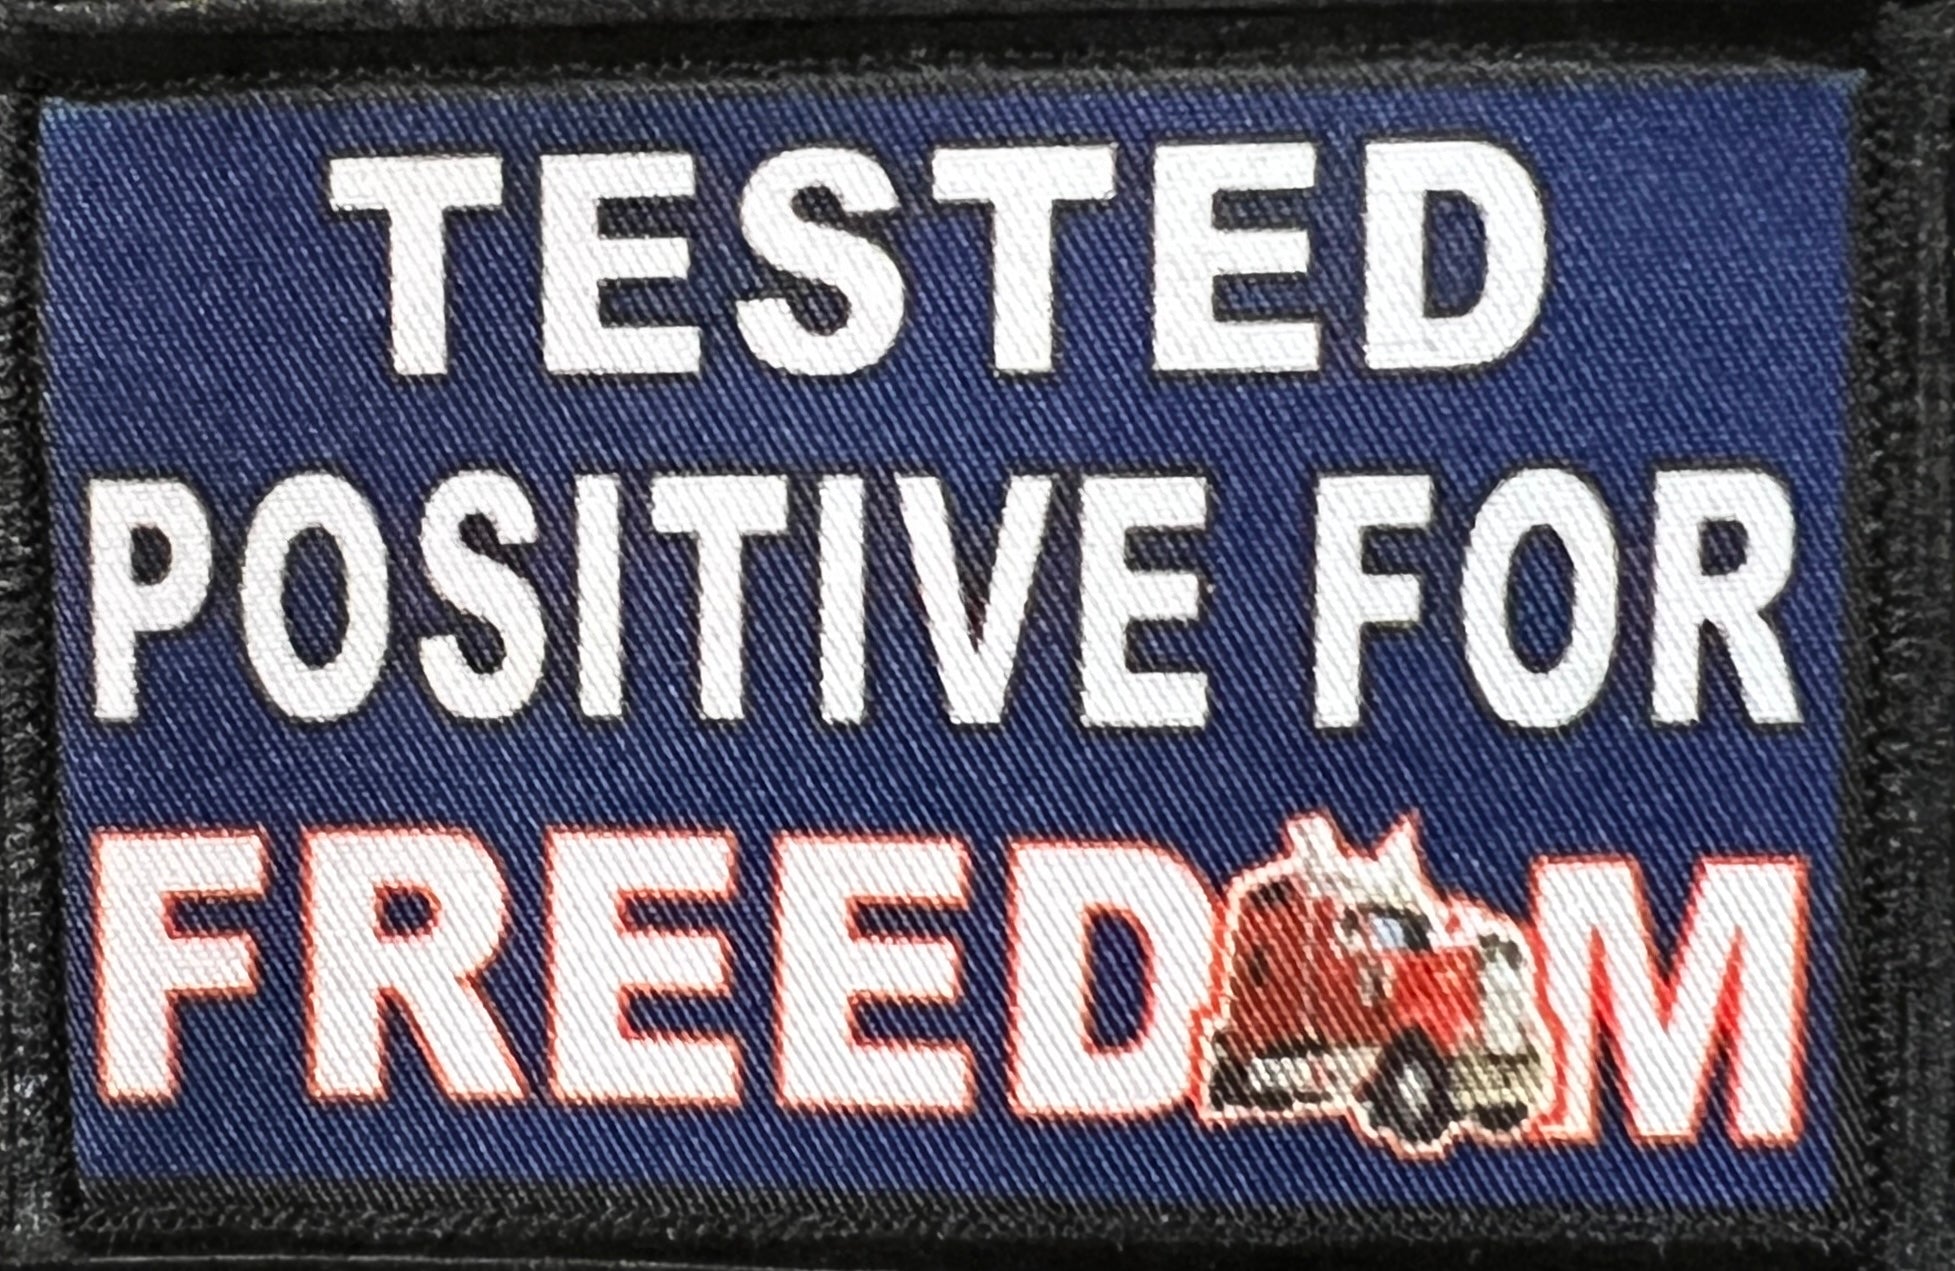 Tested Positive For Freedom Morale Patch Morale Patches Redheaded T Shirts 